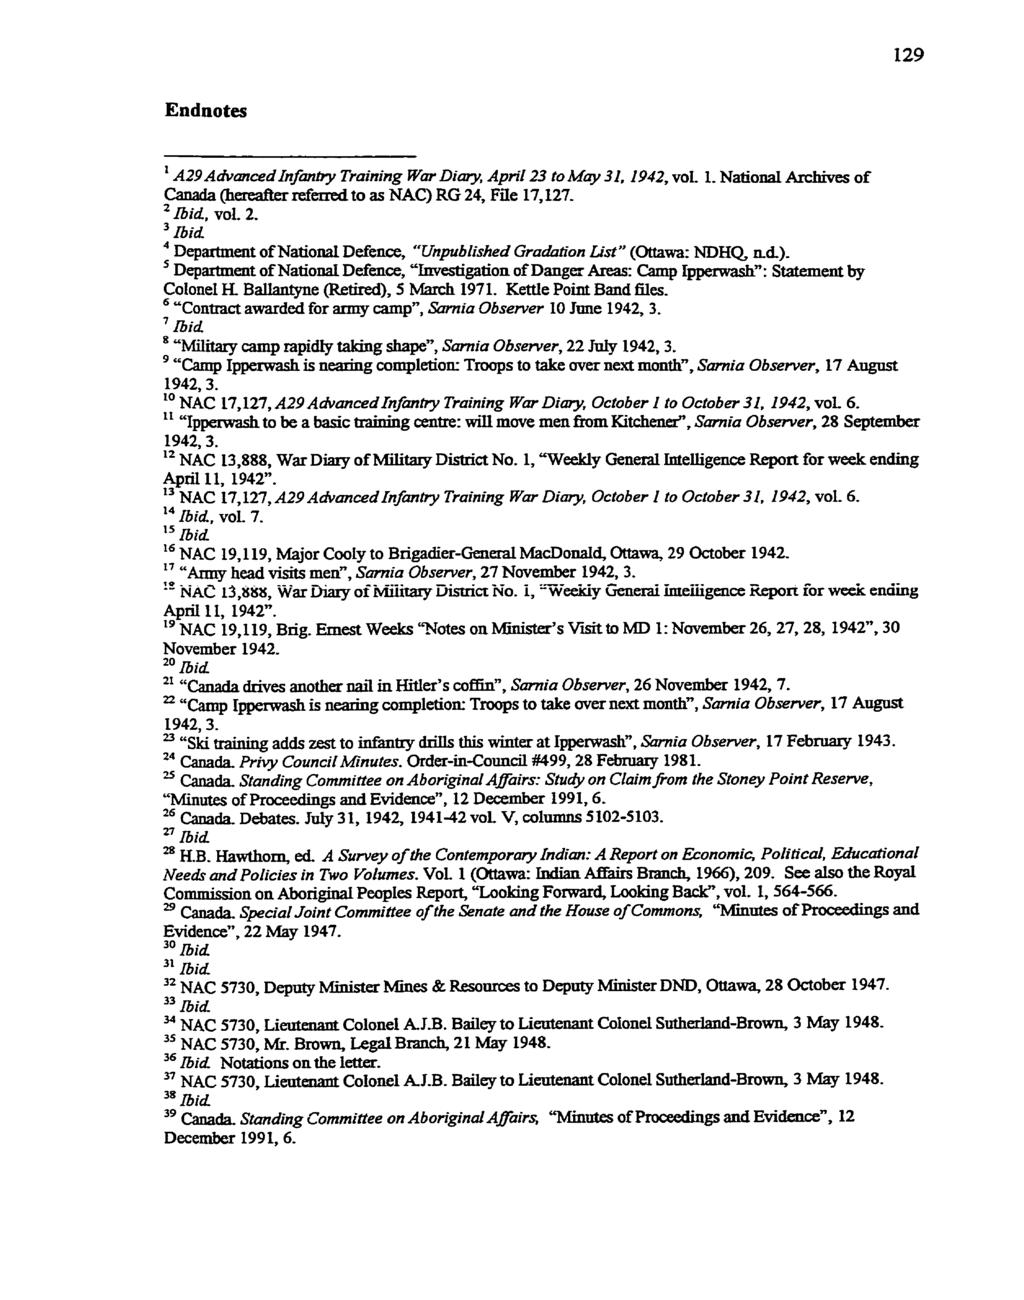 ' A29 Am>anced In fane Training WW Diq, April23 to Mày 31,I942, ML 1. National Archives of Canada (hefeaffef refened to as NAC) RG 24, Fife 17,127, ibid, vol, 2.